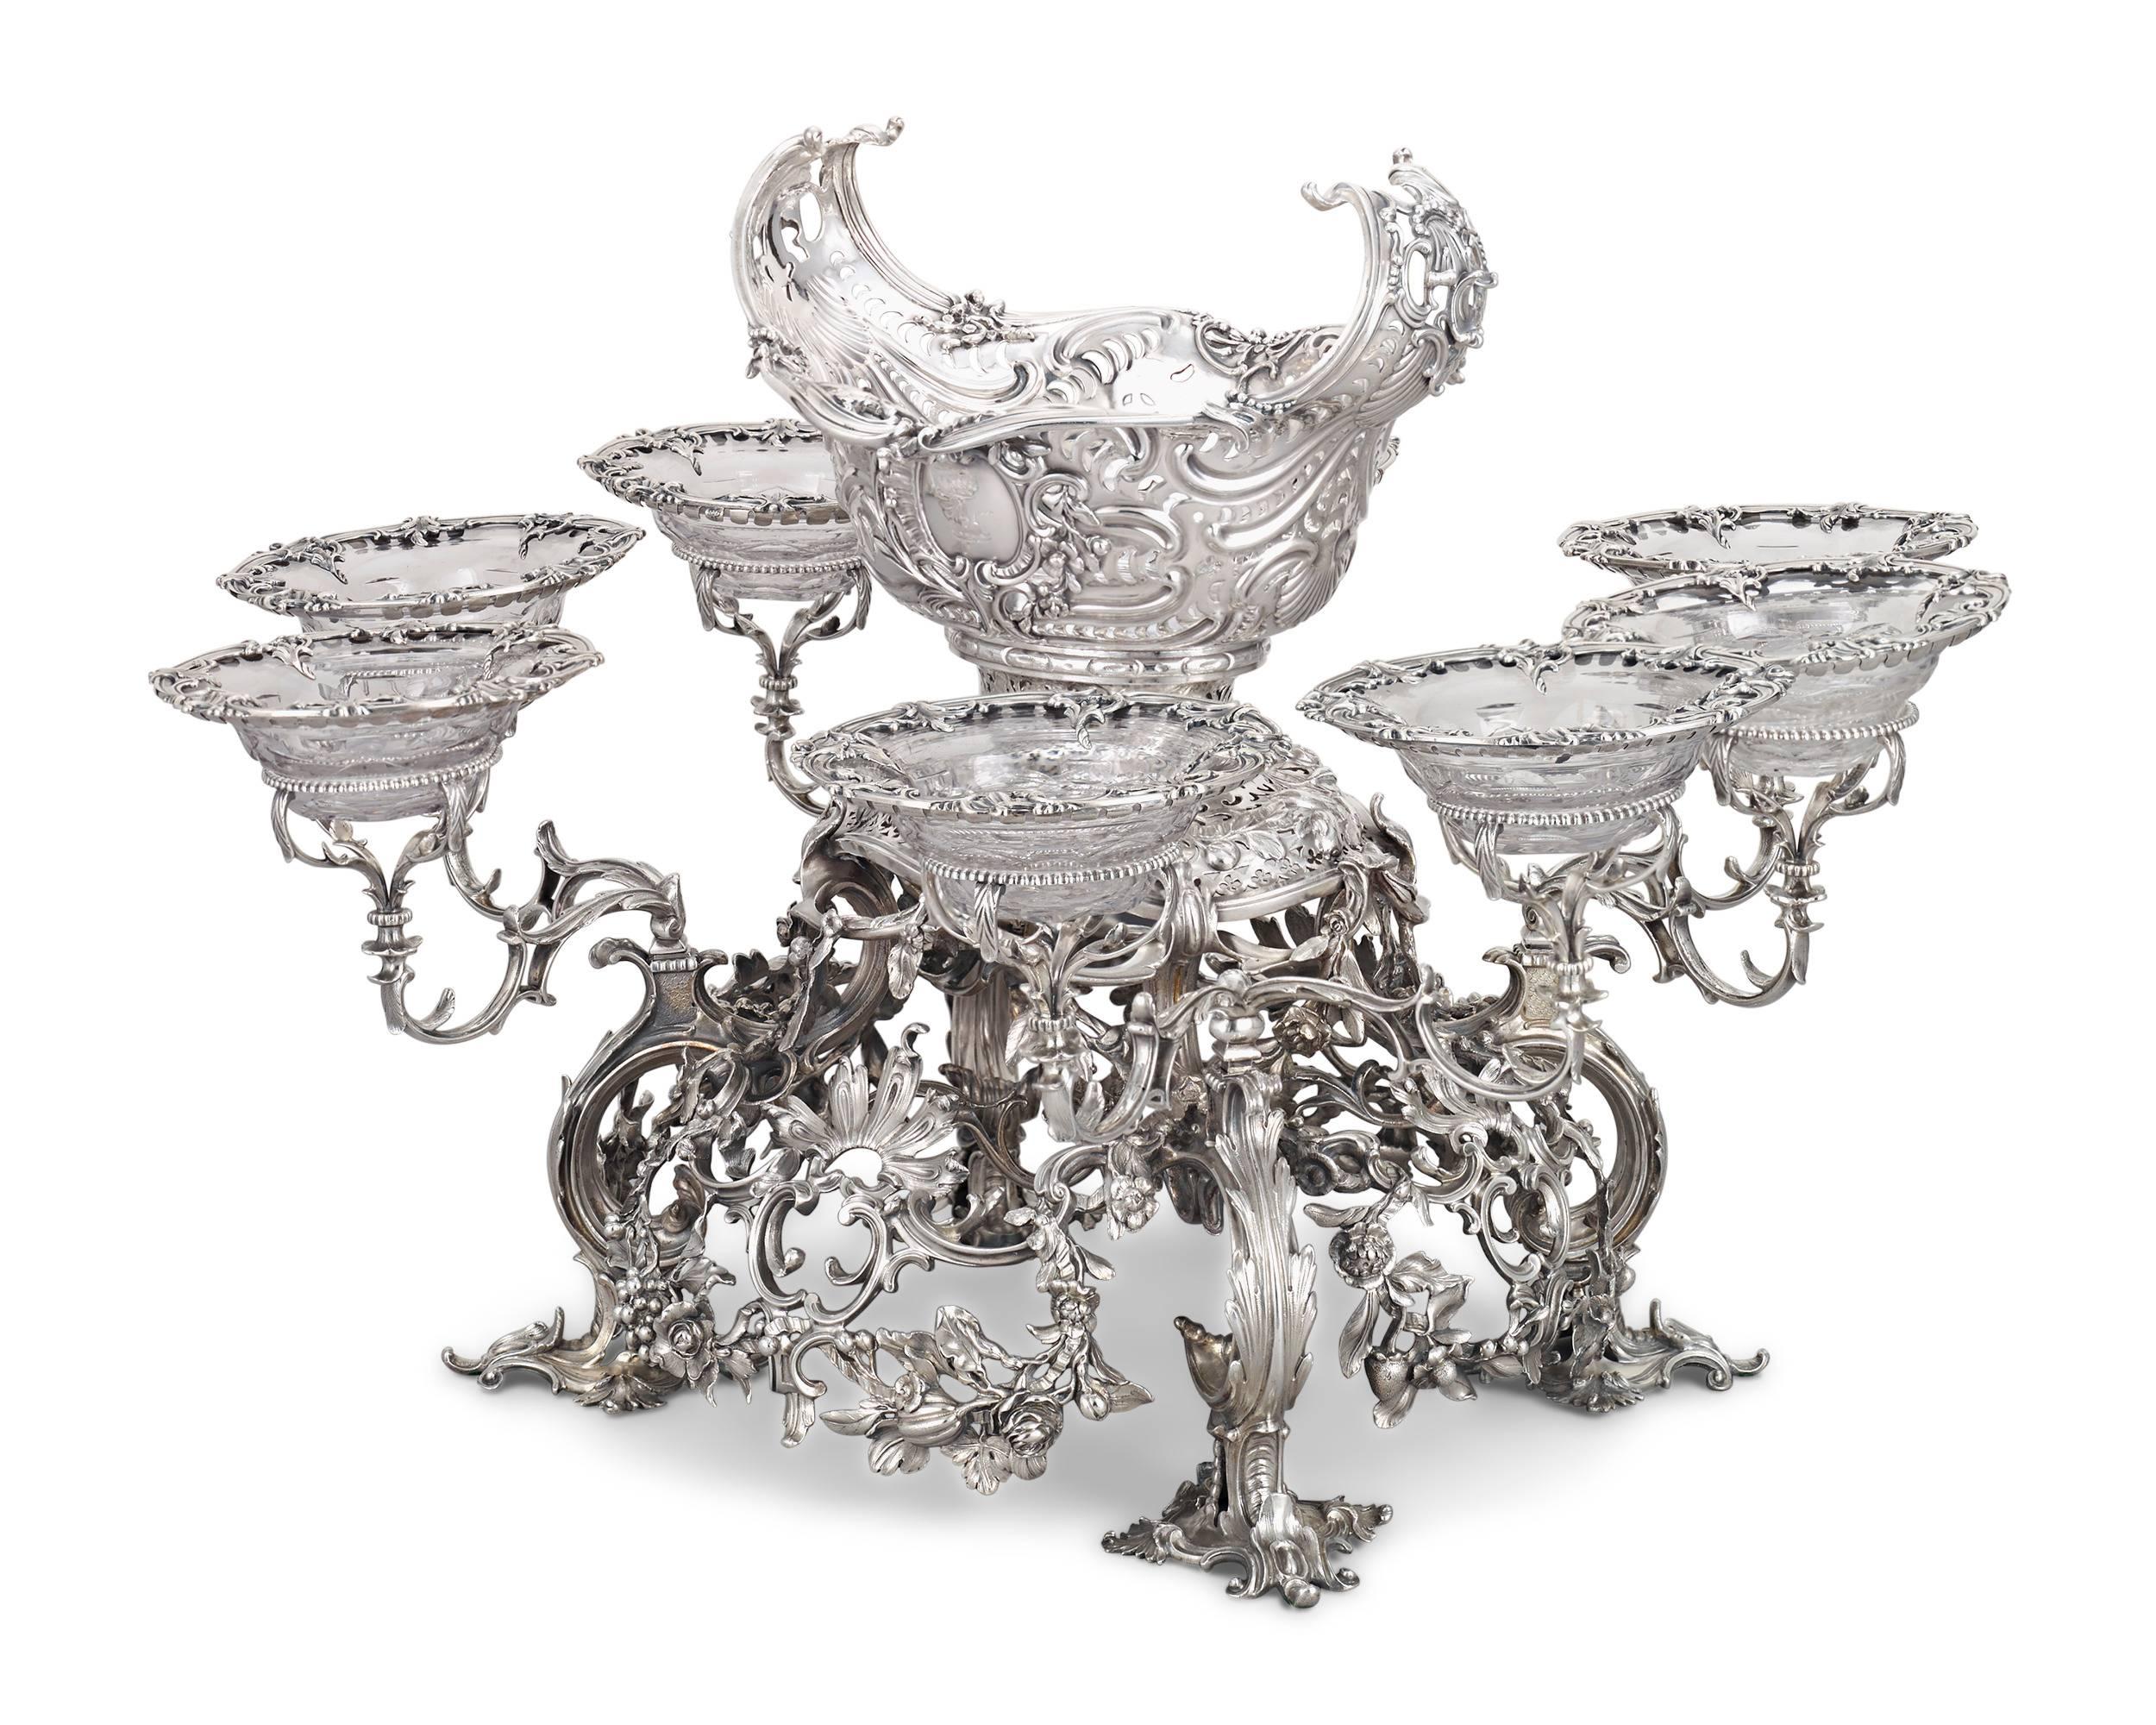 Renowned 18th century English silversmith Thomas Gilpin, regarded as one of the great Rococo silversmiths and a contemporary of Paul de Lamerie, created this highly important silver epergne. A lasting symbol of dining elegance and social status for